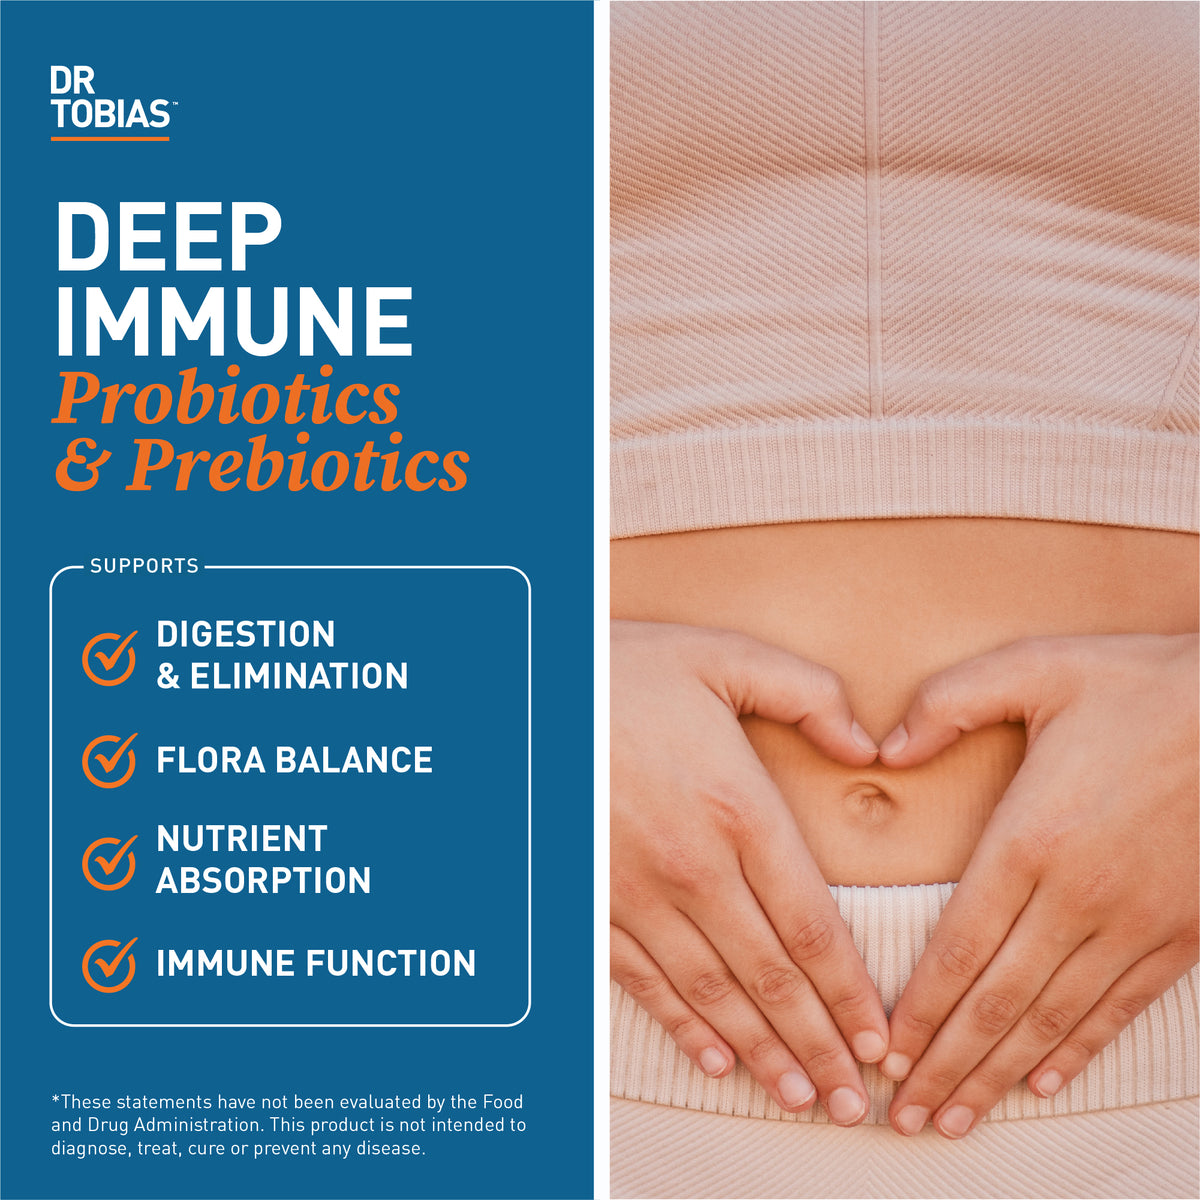 deep immune probiotics and prebiotics supports digestion & elimination, flora balance, nutrient absorption and immune function